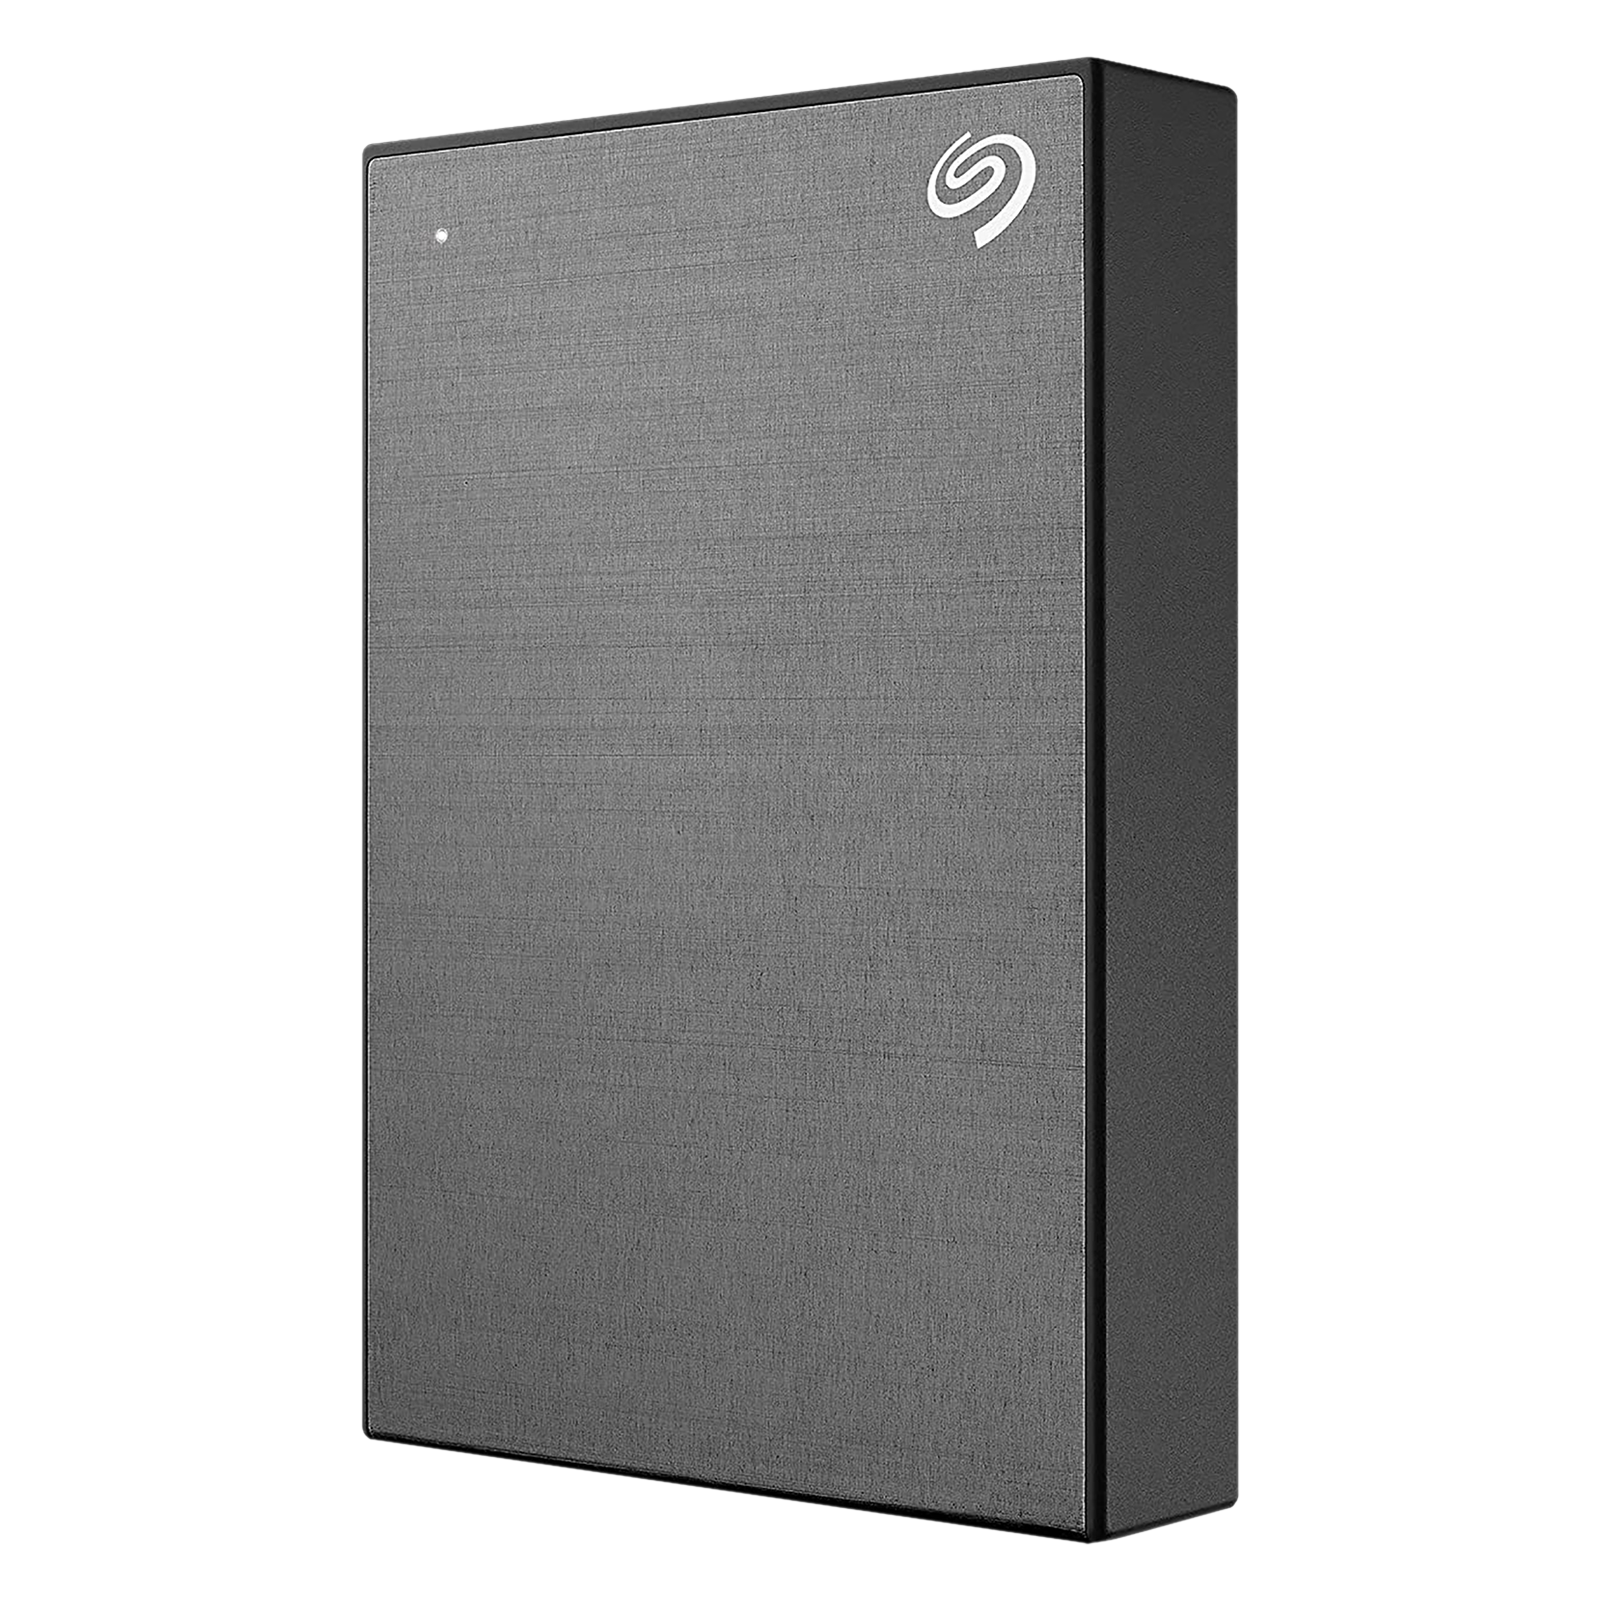 SEAGATE One Touch 4TB USB 3.0 Hard Disk Drive (Password Activated Hardware Encryption, STKZ4000404, Grey)